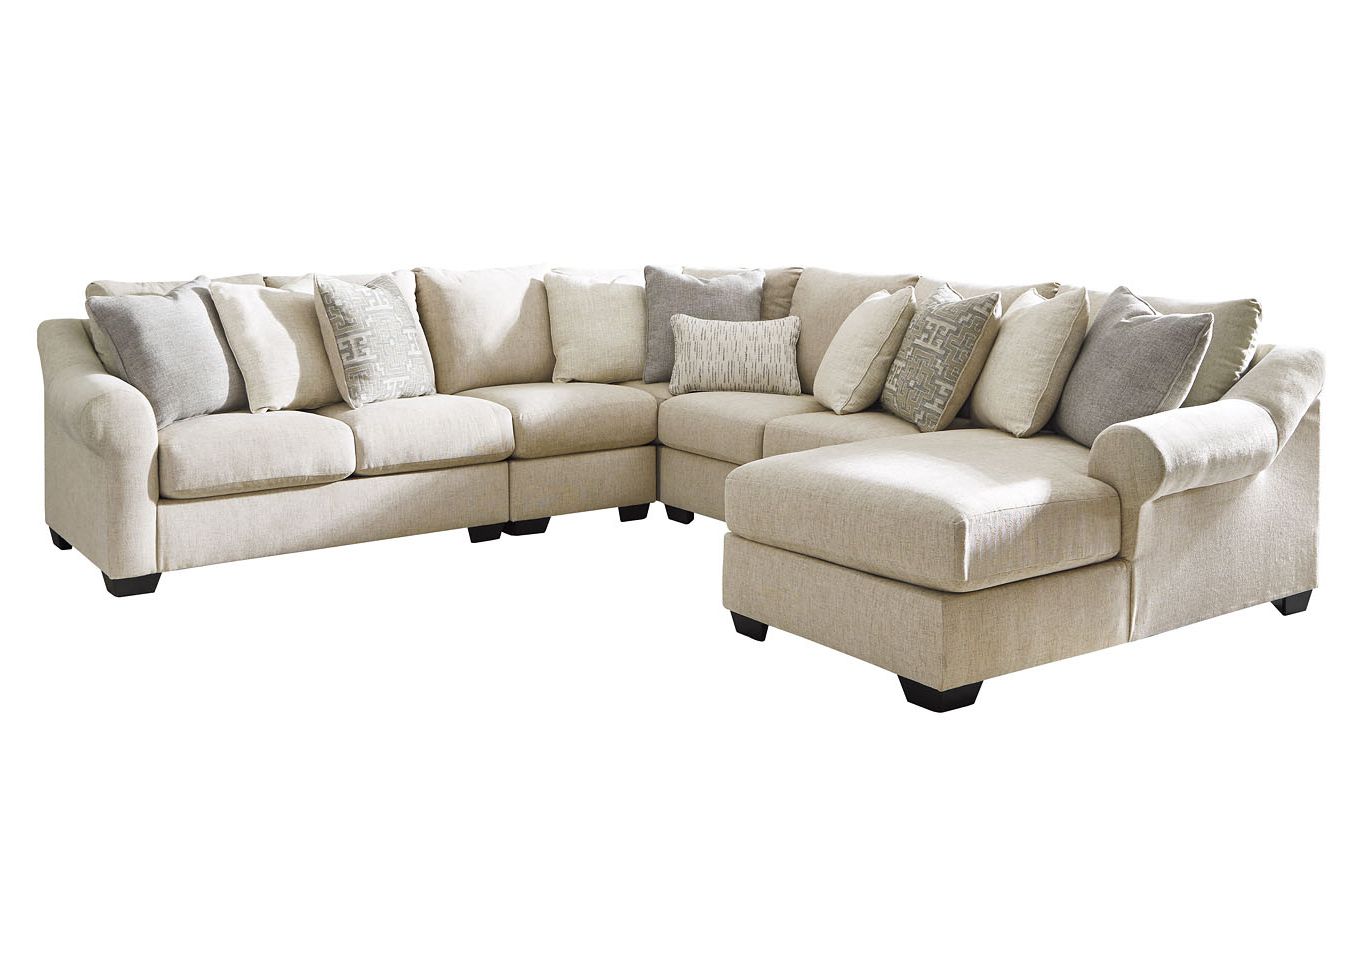 Well Known Setoril Modern Sectional Sofa Swith Chaise Woven Linen For Carnaby 5 Piece Sectional Chaise Ashley Furniture (View 5 of 25)